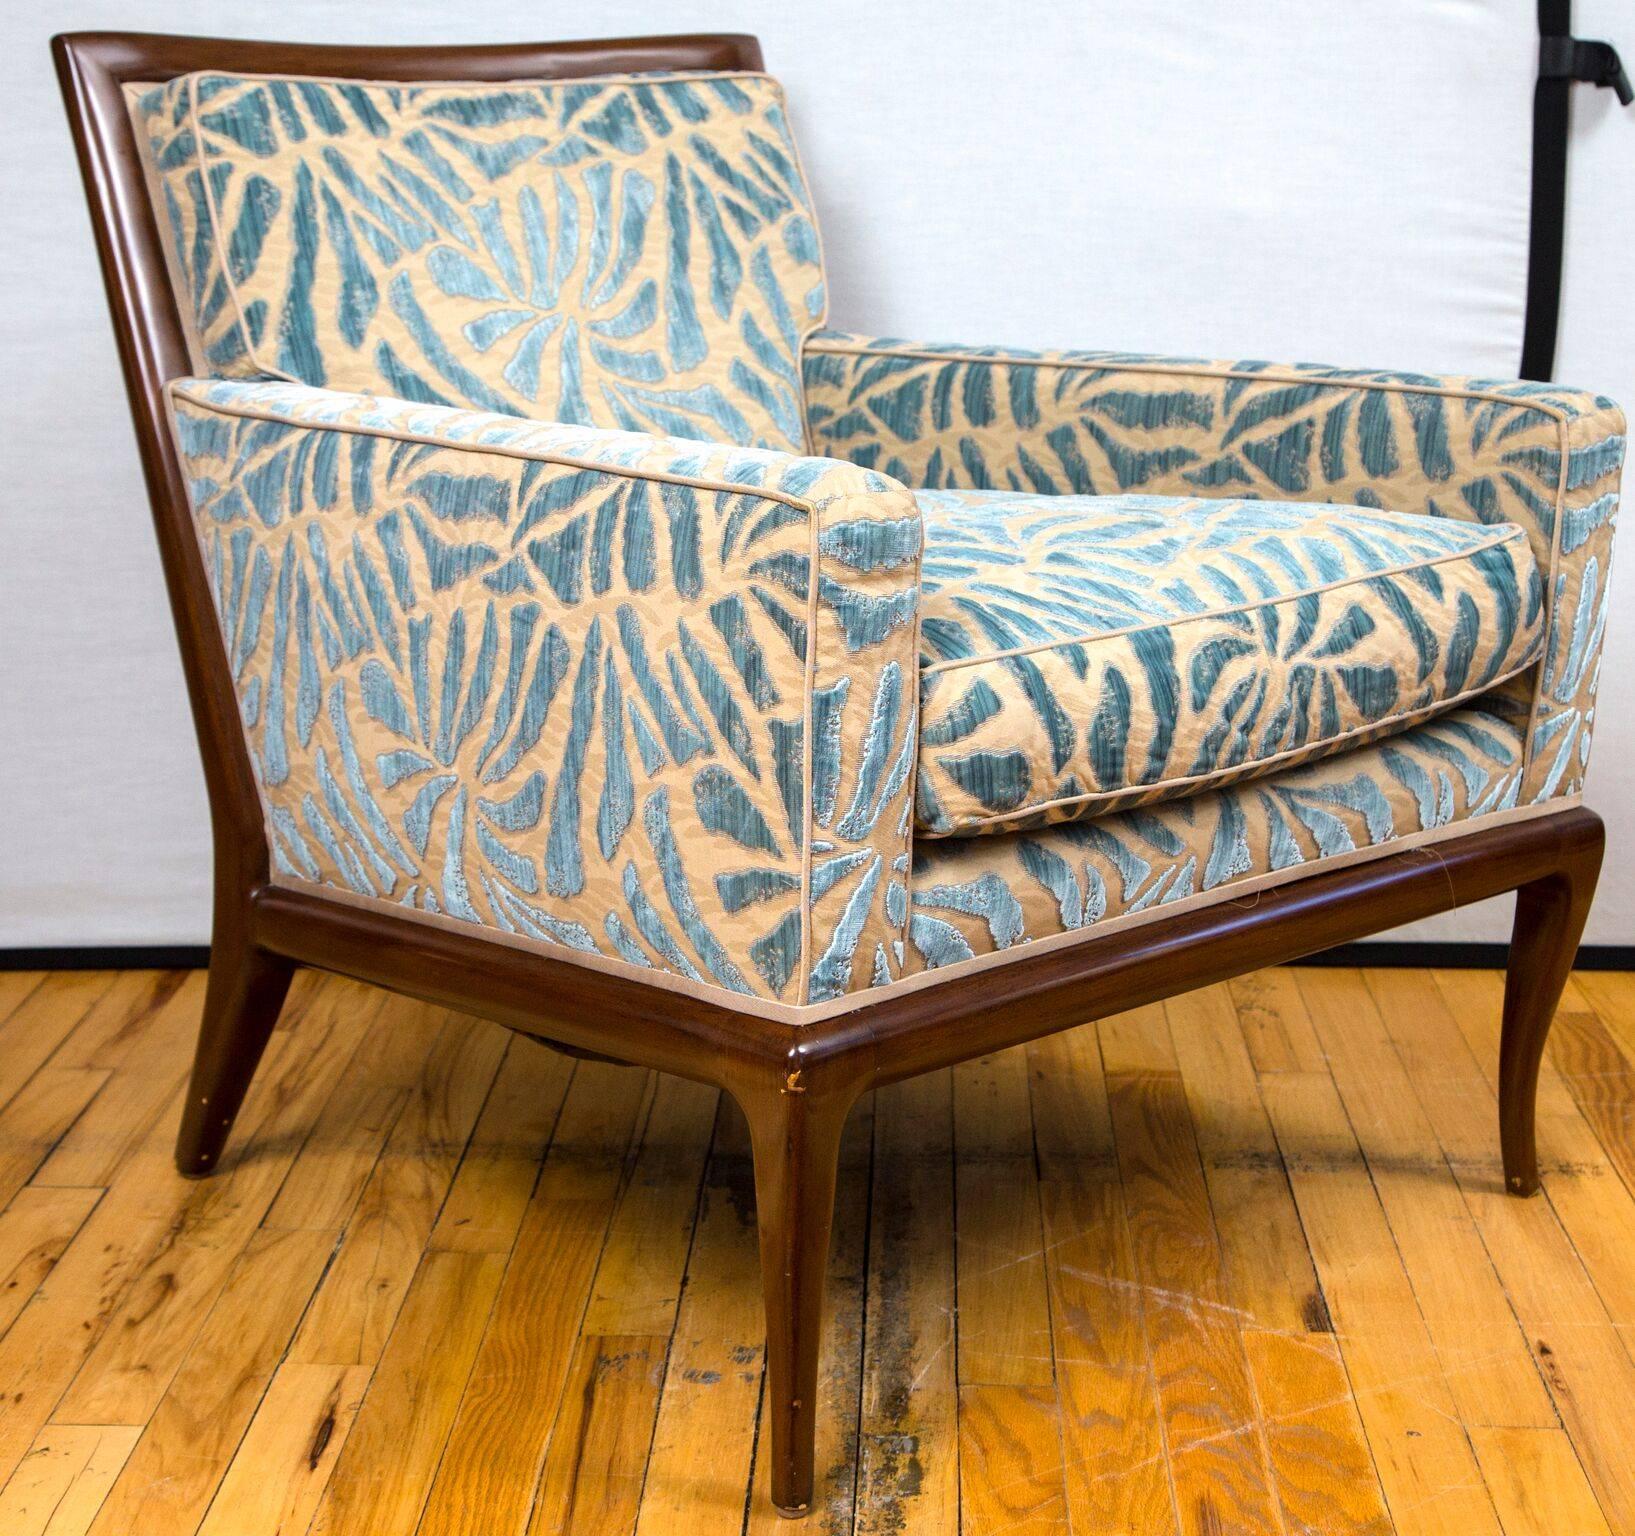 A pair of Nancy Corzine Allure lounge chairs upholstered in Nancy Corzine Cavallo fabric.